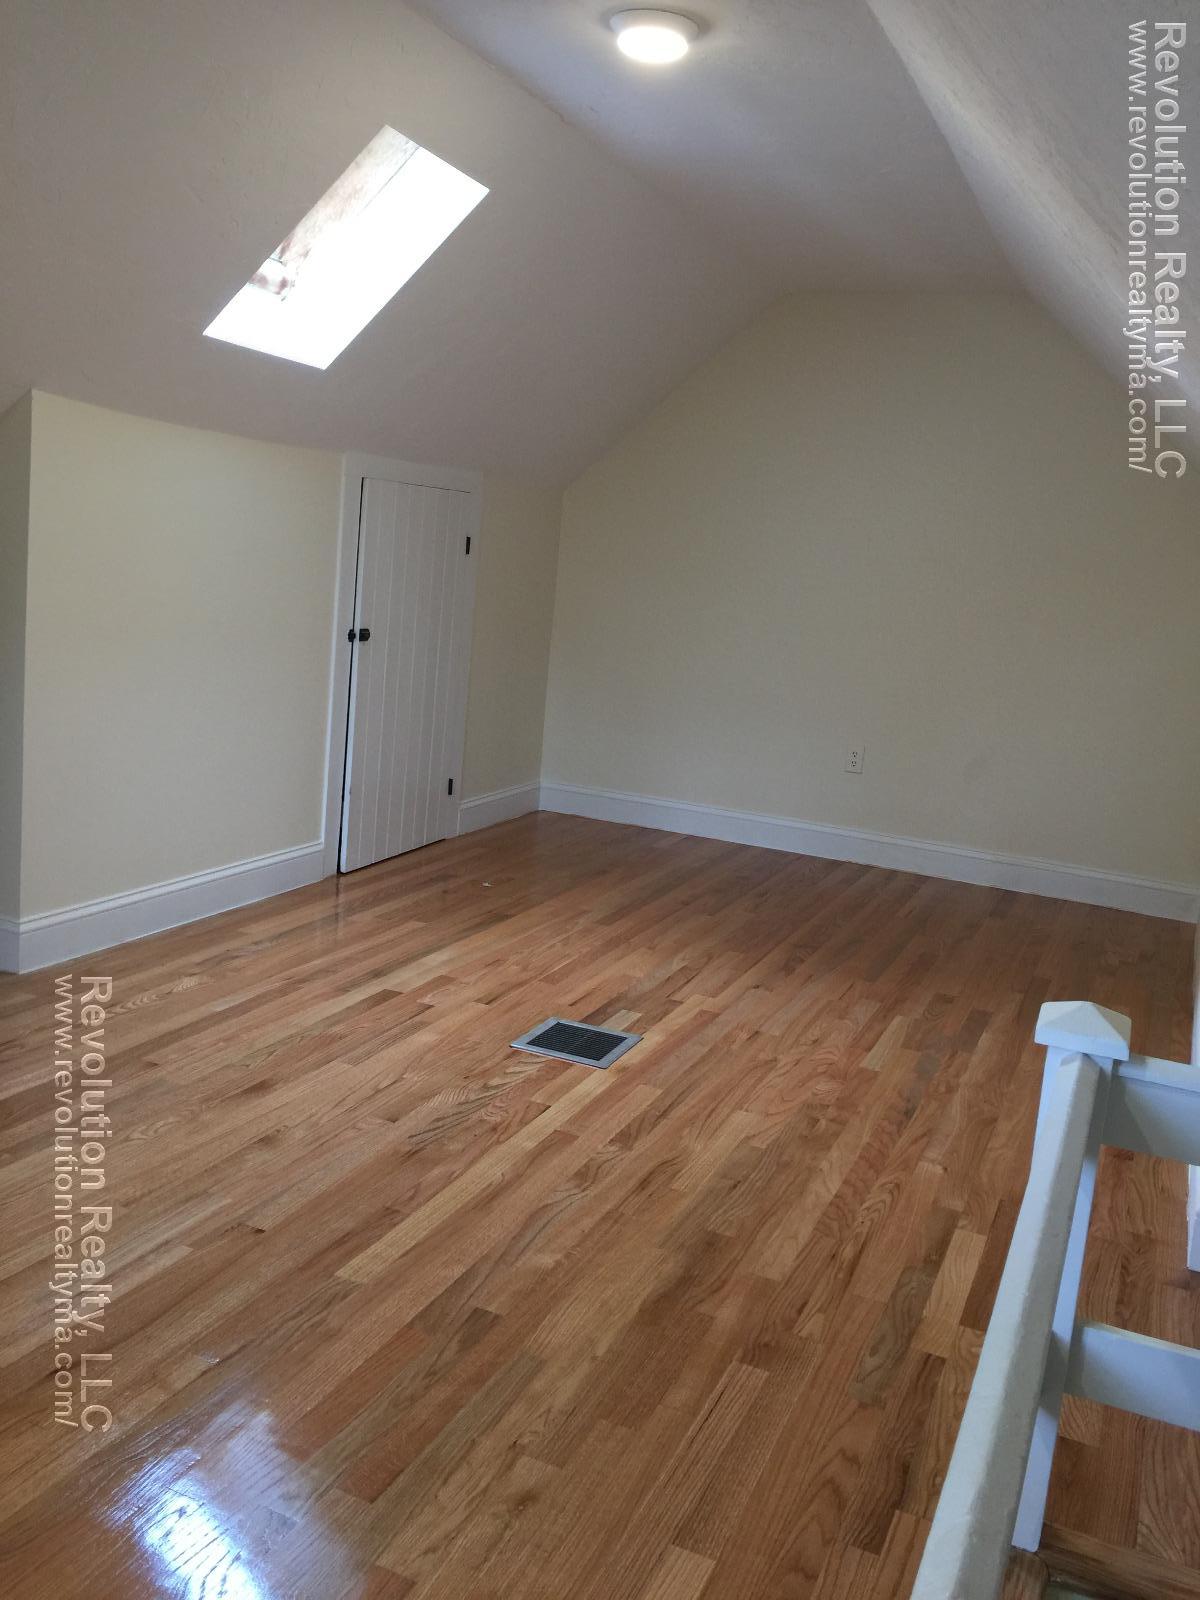 Photos of apartment on Cuba St.,Watertown MA 02472